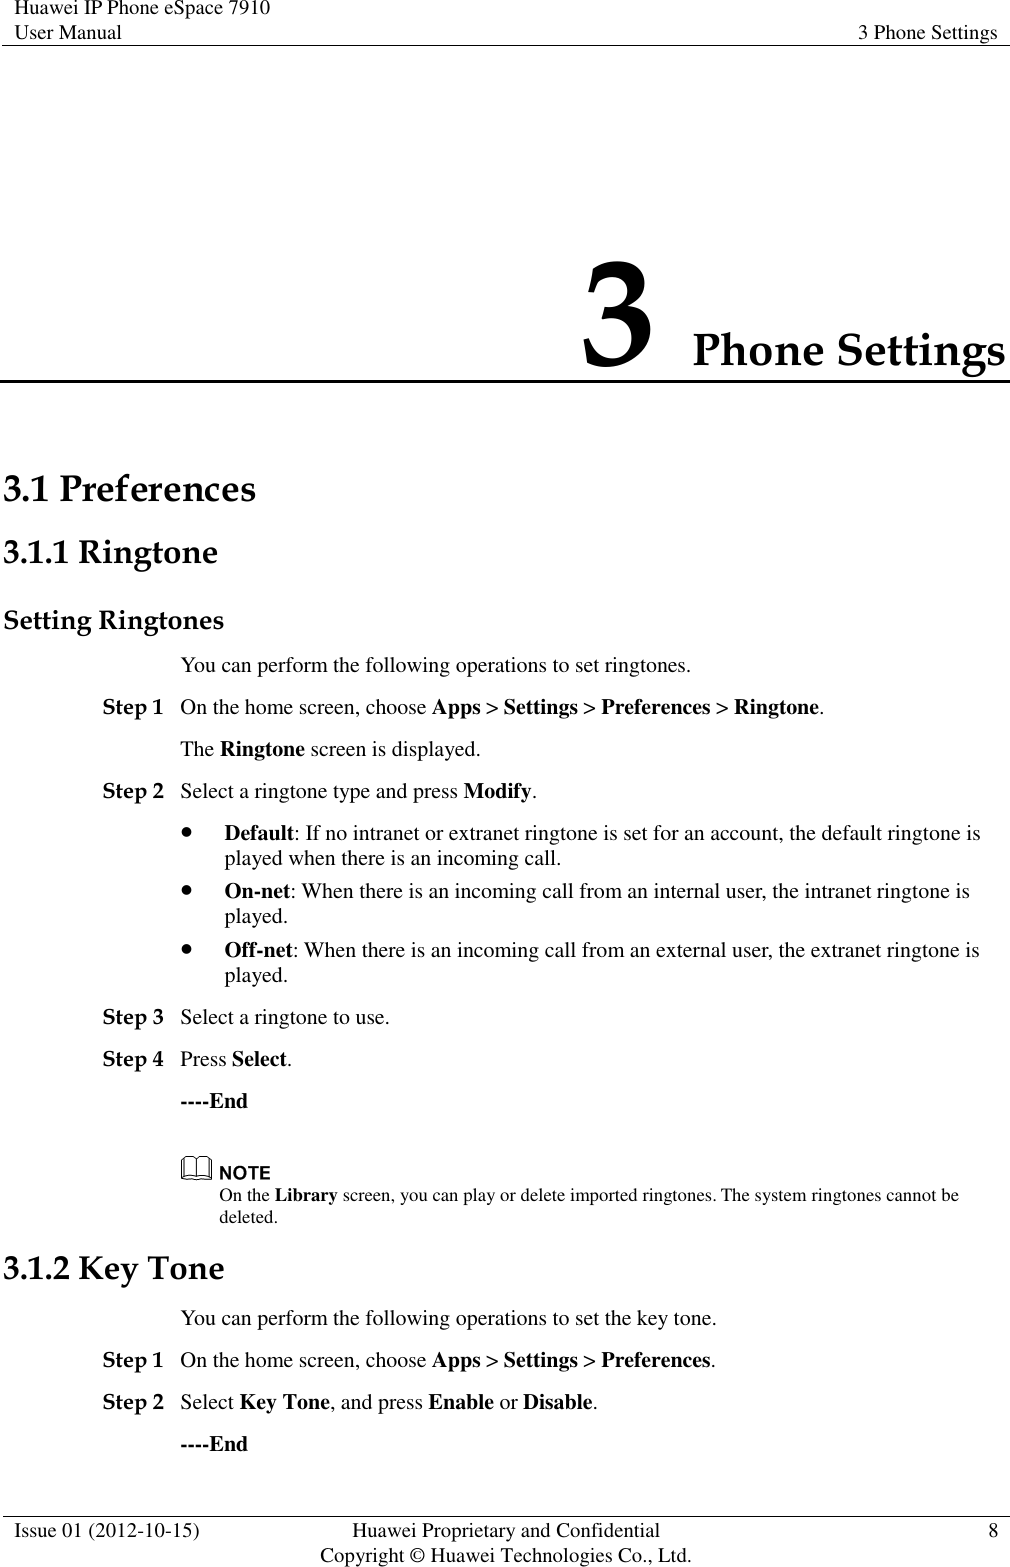 Huawei IP Phone eSpace 7910 User Manual 3 Phone Settings  Issue 01 (2012-10-15) Huawei Proprietary and Confidential                                     Copyright © Huawei Technologies Co., Ltd. 8  3 Phone Settings 3.1 Preferences 3.1.1 Ringtone Setting Ringtones You can perform the following operations to set ringtones. Step 1 On the home screen, choose Apps &gt; Settings &gt; Preferences &gt; Ringtone. The Ringtone screen is displayed. Step 2 Select a ringtone type and press Modify.  Default: If no intranet or extranet ringtone is set for an account, the default ringtone is played when there is an incoming call.  On-net: When there is an incoming call from an internal user, the intranet ringtone is played.  Off-net: When there is an incoming call from an external user, the extranet ringtone is played. Step 3 Select a ringtone to use. Step 4 Press Select. ----End  On the Library screen, you can play or delete imported ringtones. The system ringtones cannot be deleted. 3.1.2 Key Tone You can perform the following operations to set the key tone. Step 1 On the home screen, choose Apps &gt; Settings &gt; Preferences. Step 2 Select Key Tone, and press Enable or Disable. ----End 